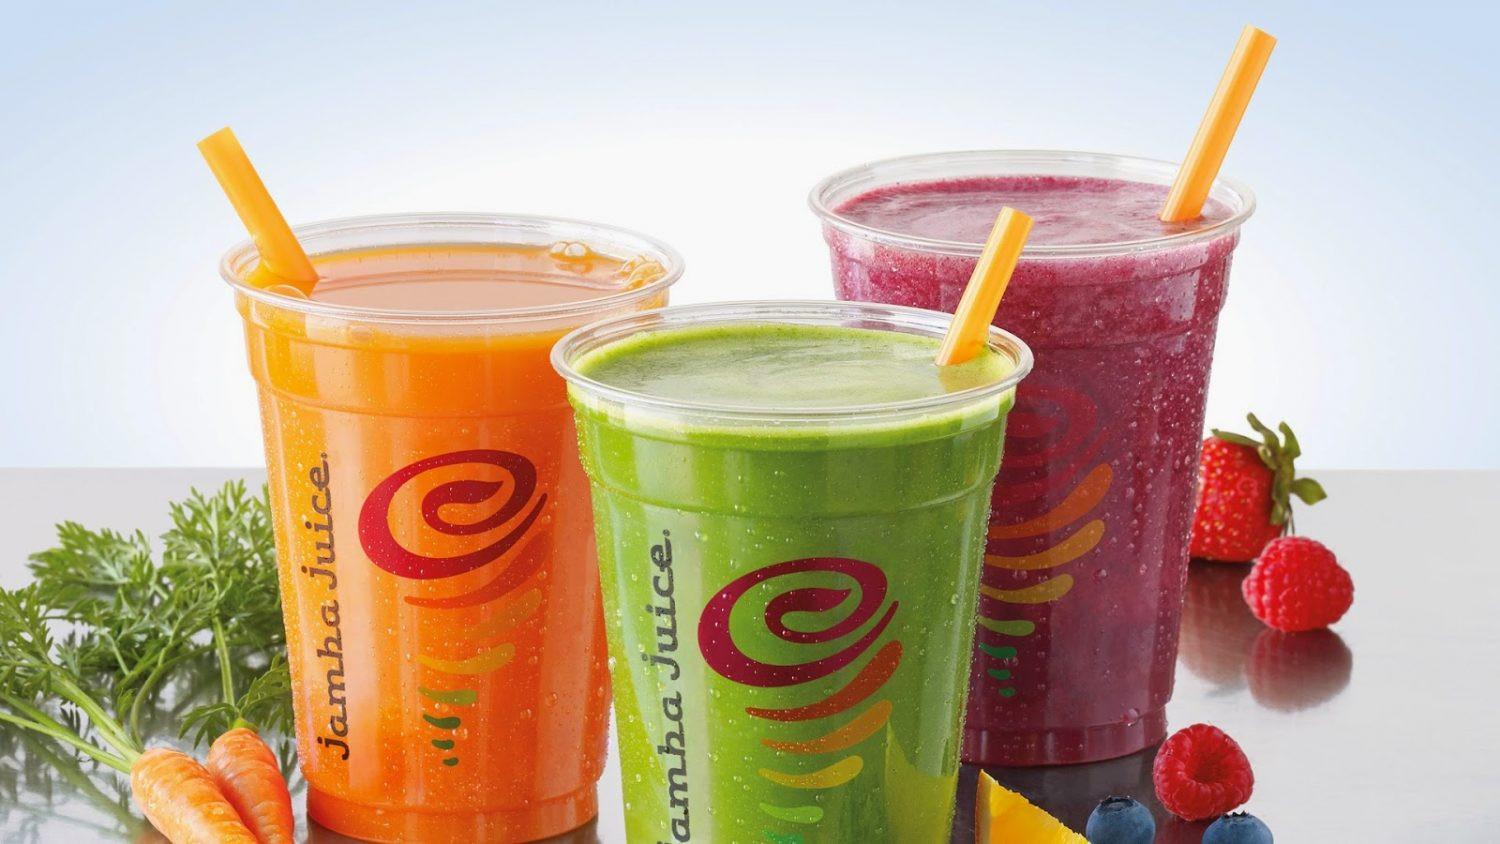 Healthy Juice Smoothies
 A New Healthy Drink Option at Jamba Juice